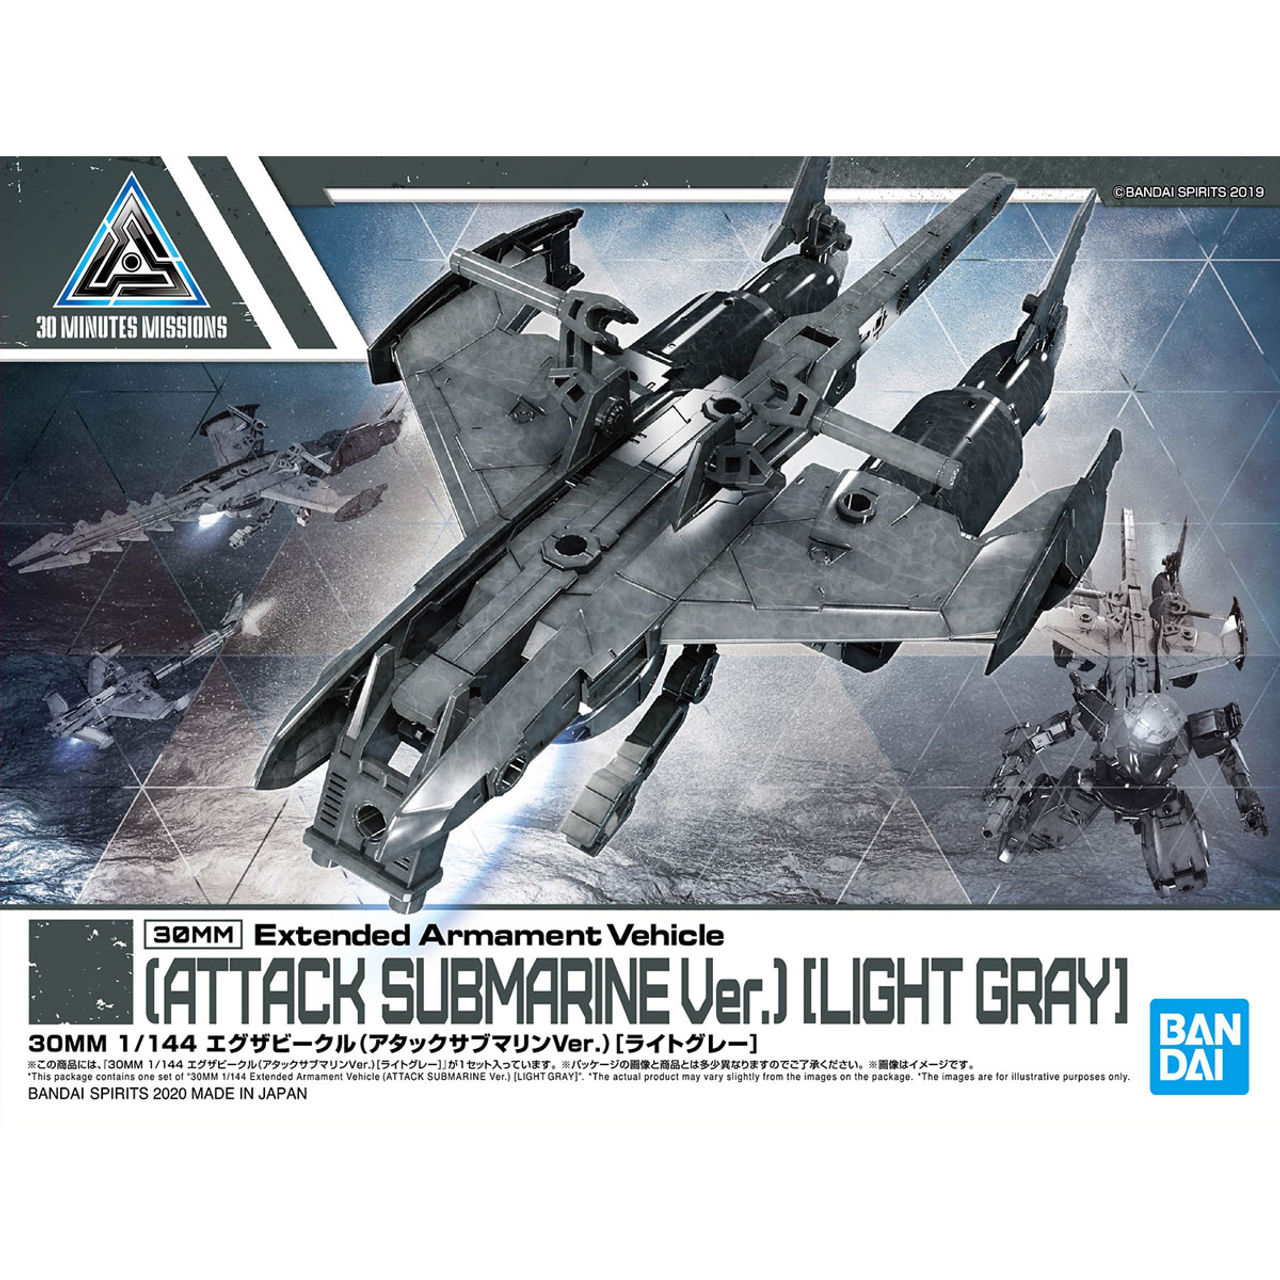 2530626 Bandai Spirits 30 Minute Missions #05 Attack Submarine Light Gray Extended Armament Vehicle